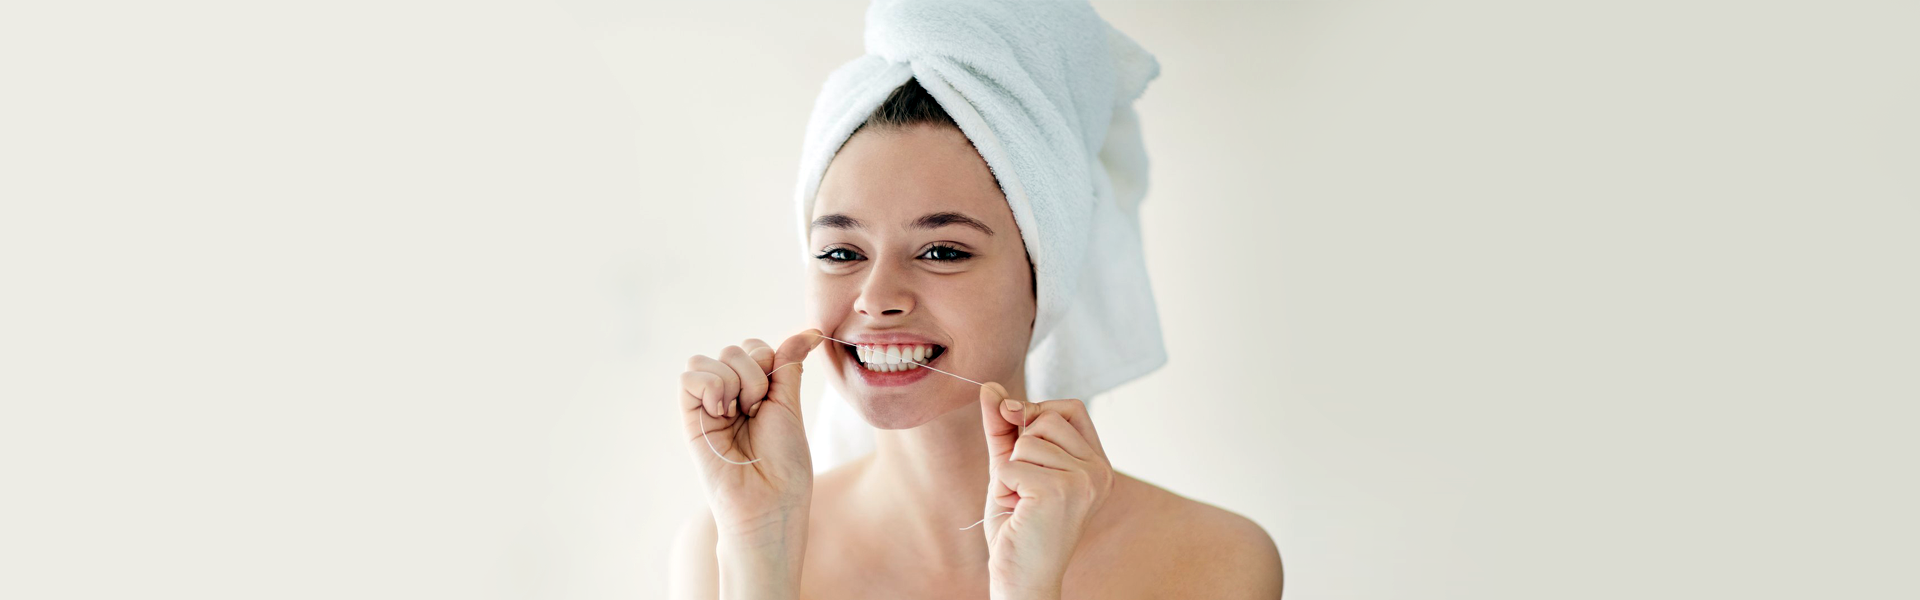 Improve Your Brushing and Flossing with These Tips 